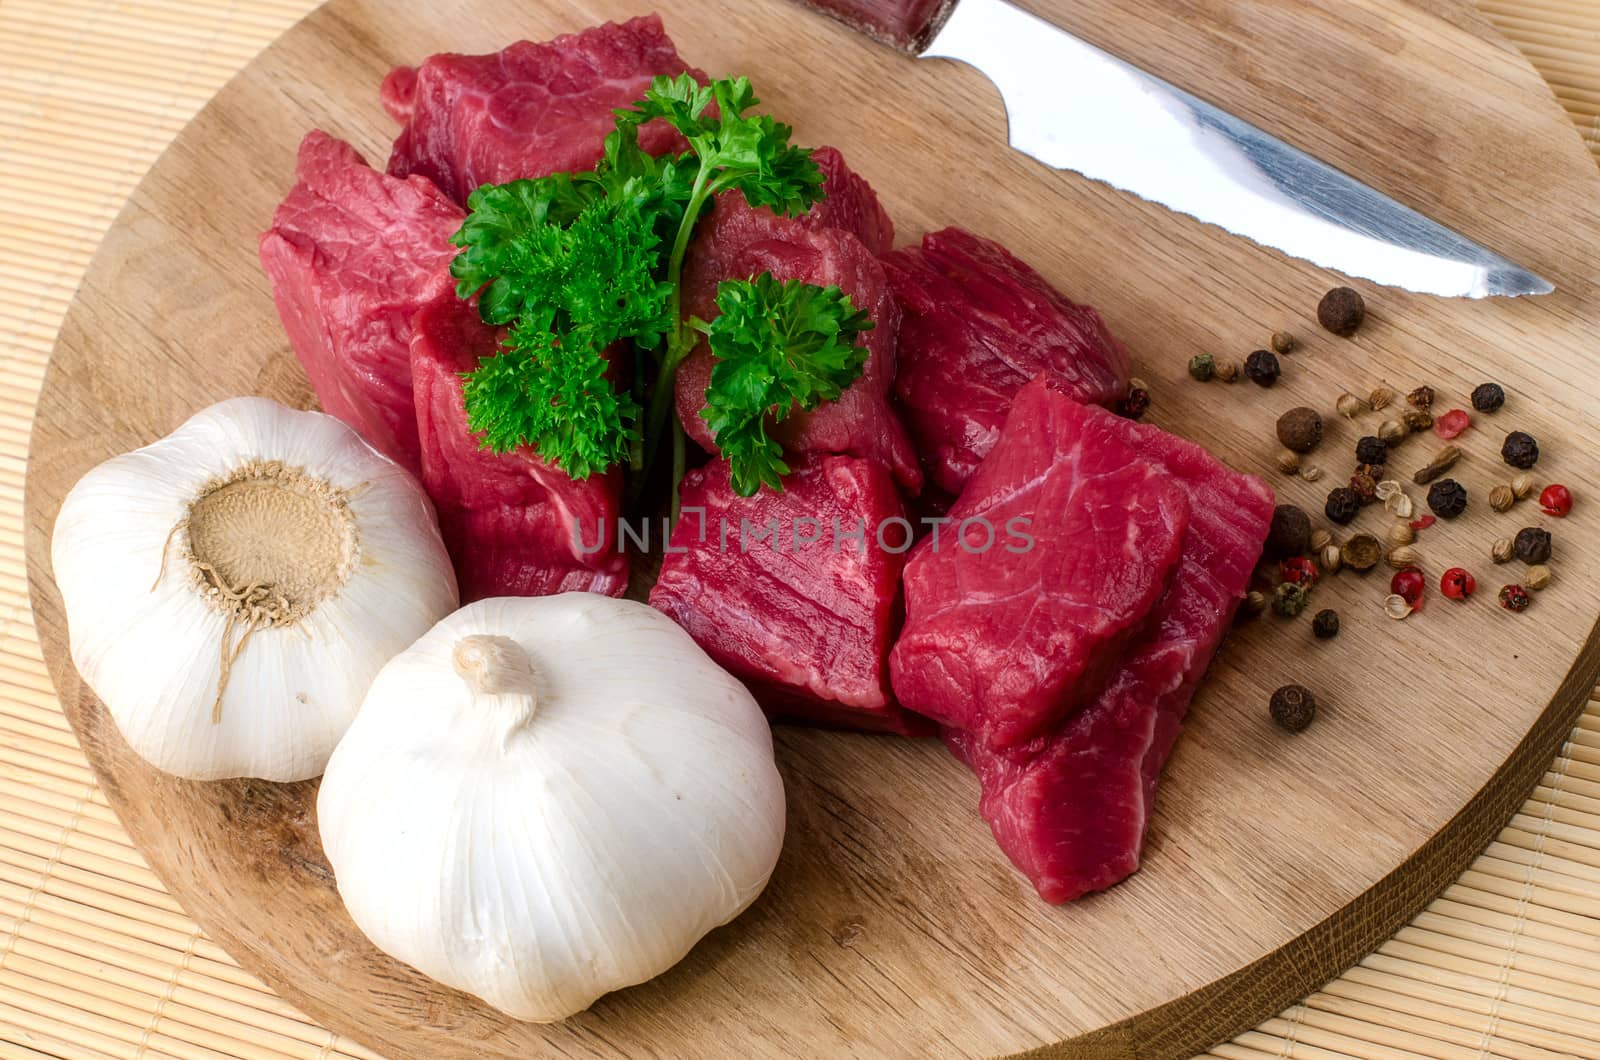 raw meat, vegetables and spices